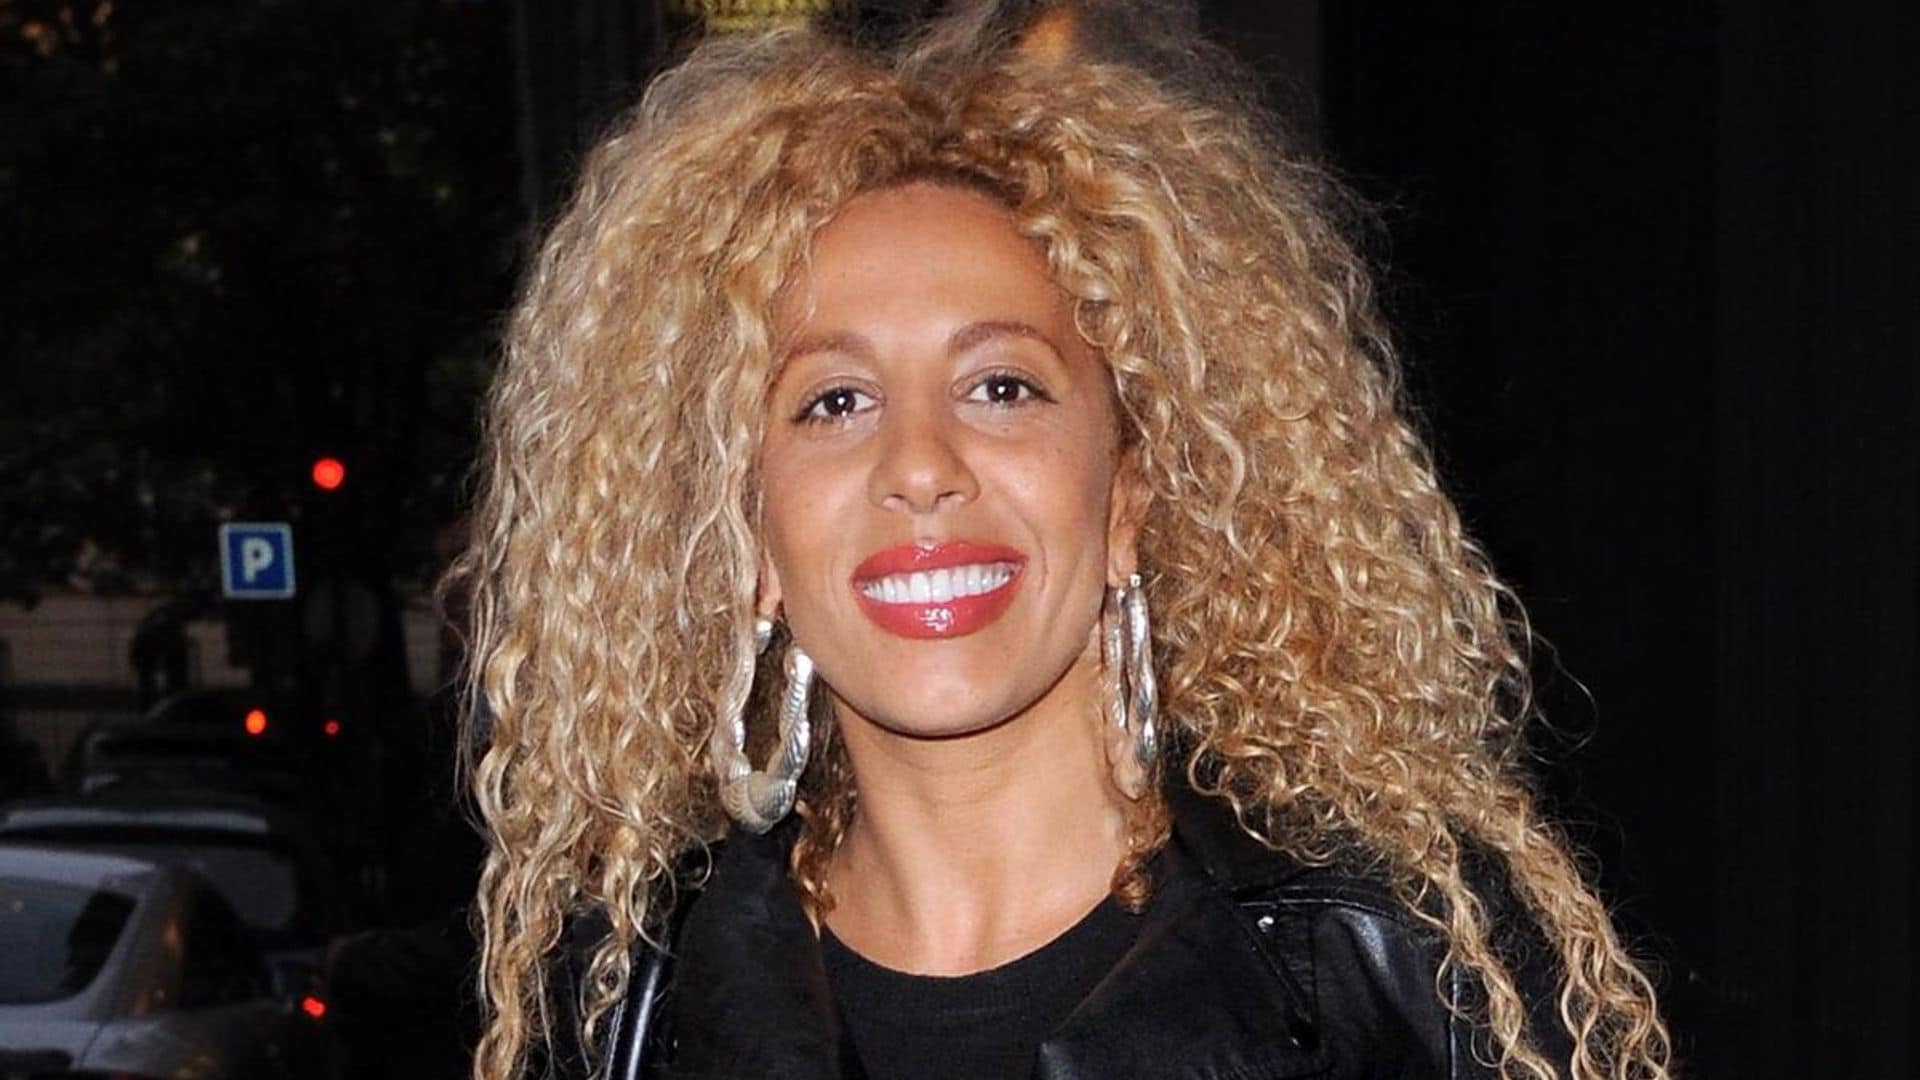 Tina Turner’s daughter in law to have a baby with late husband’s sperm